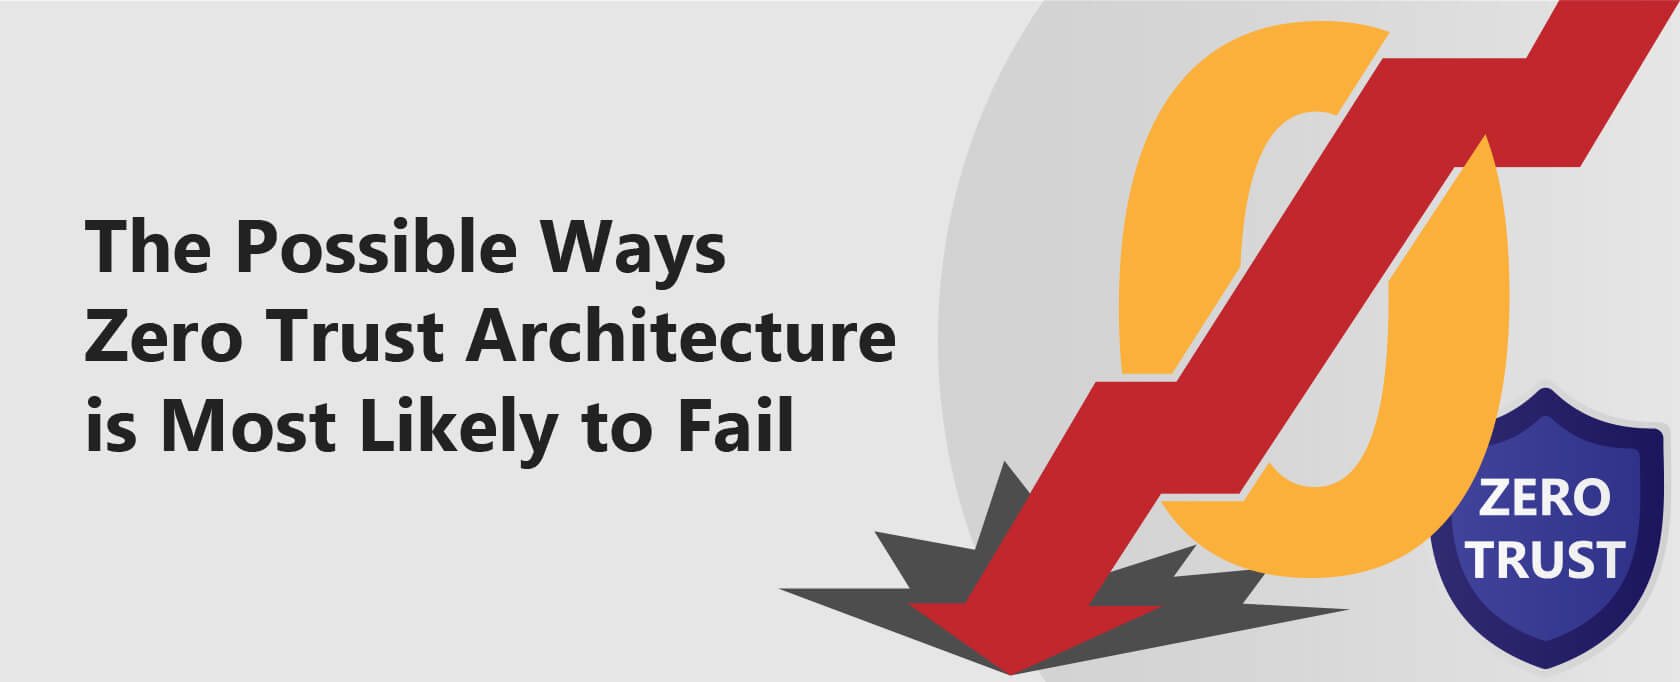 The Possible Ways Zero Trust Architecture is Most Likely to Fail